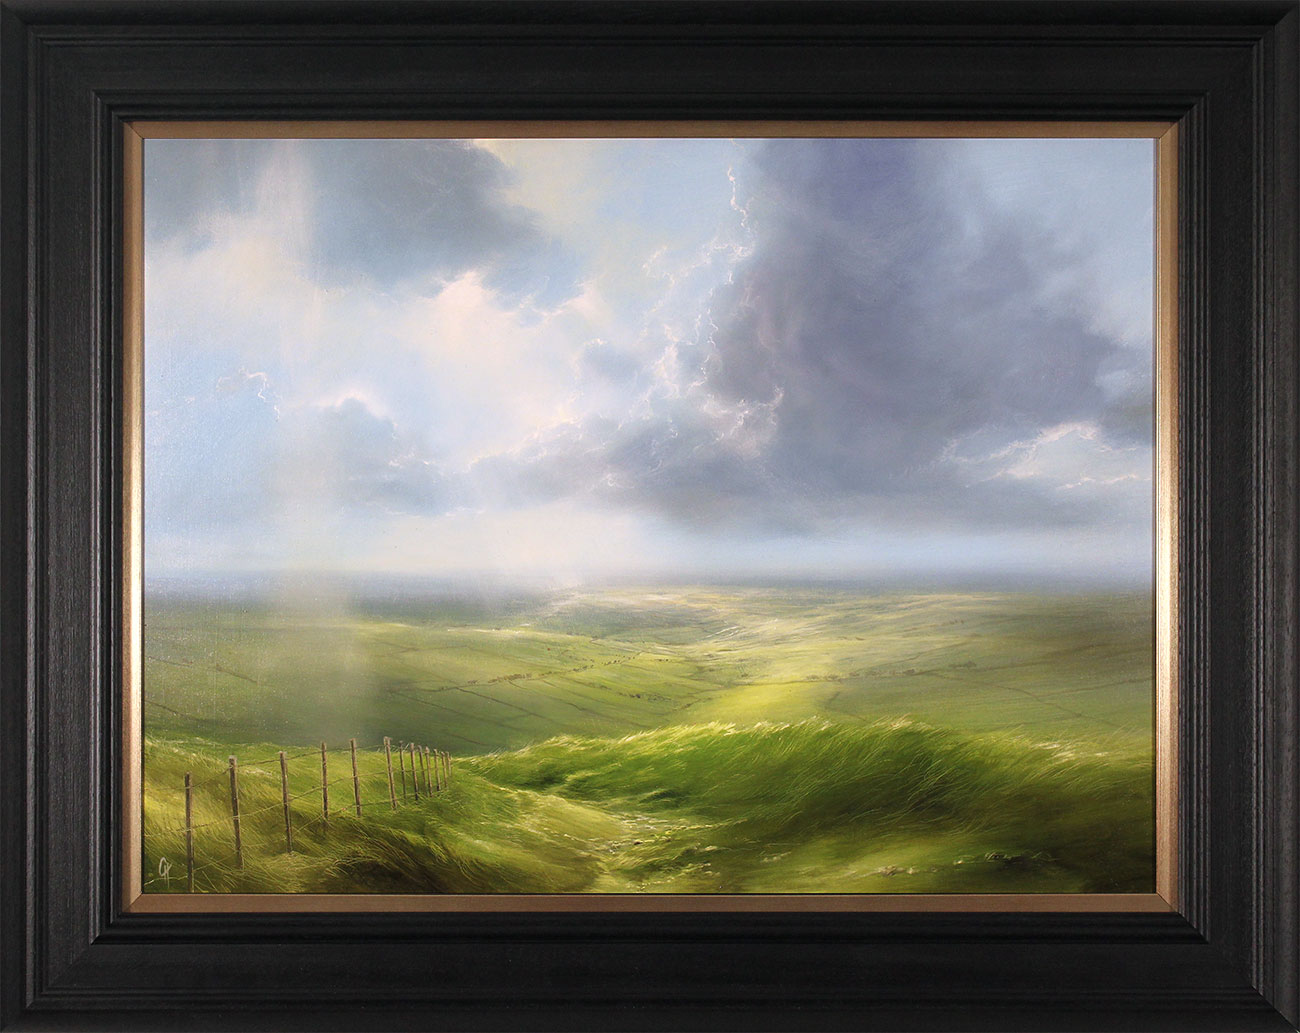 Clare Haley, Original oil painting on panel, A Fine Way to Spend the Day. Click to enlarge